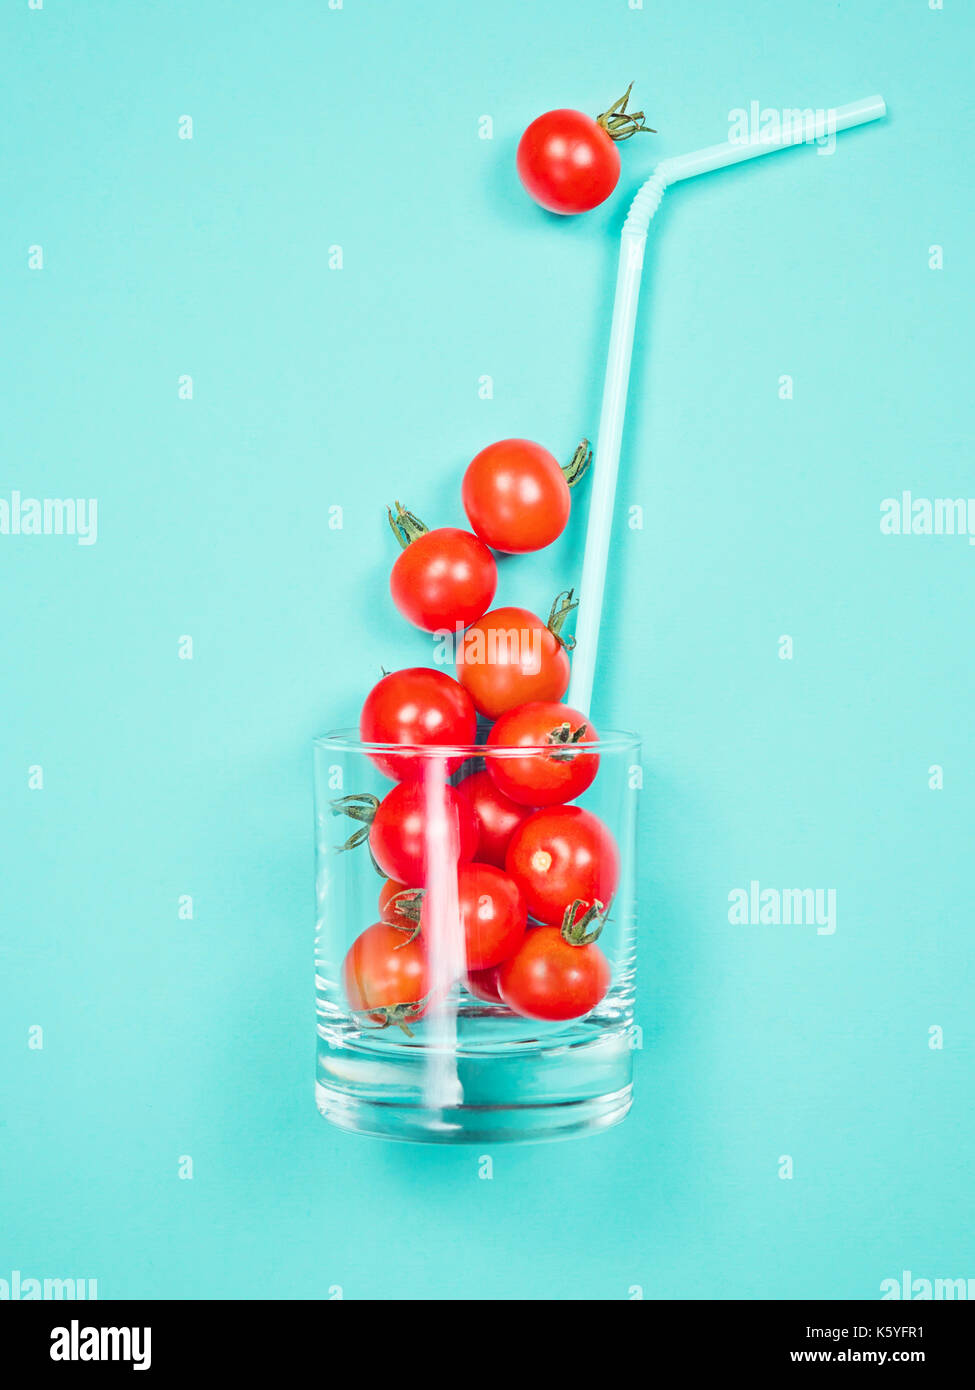 Tomato juice or smoothie, cherry tomato in drink glass with straw Stock Photo